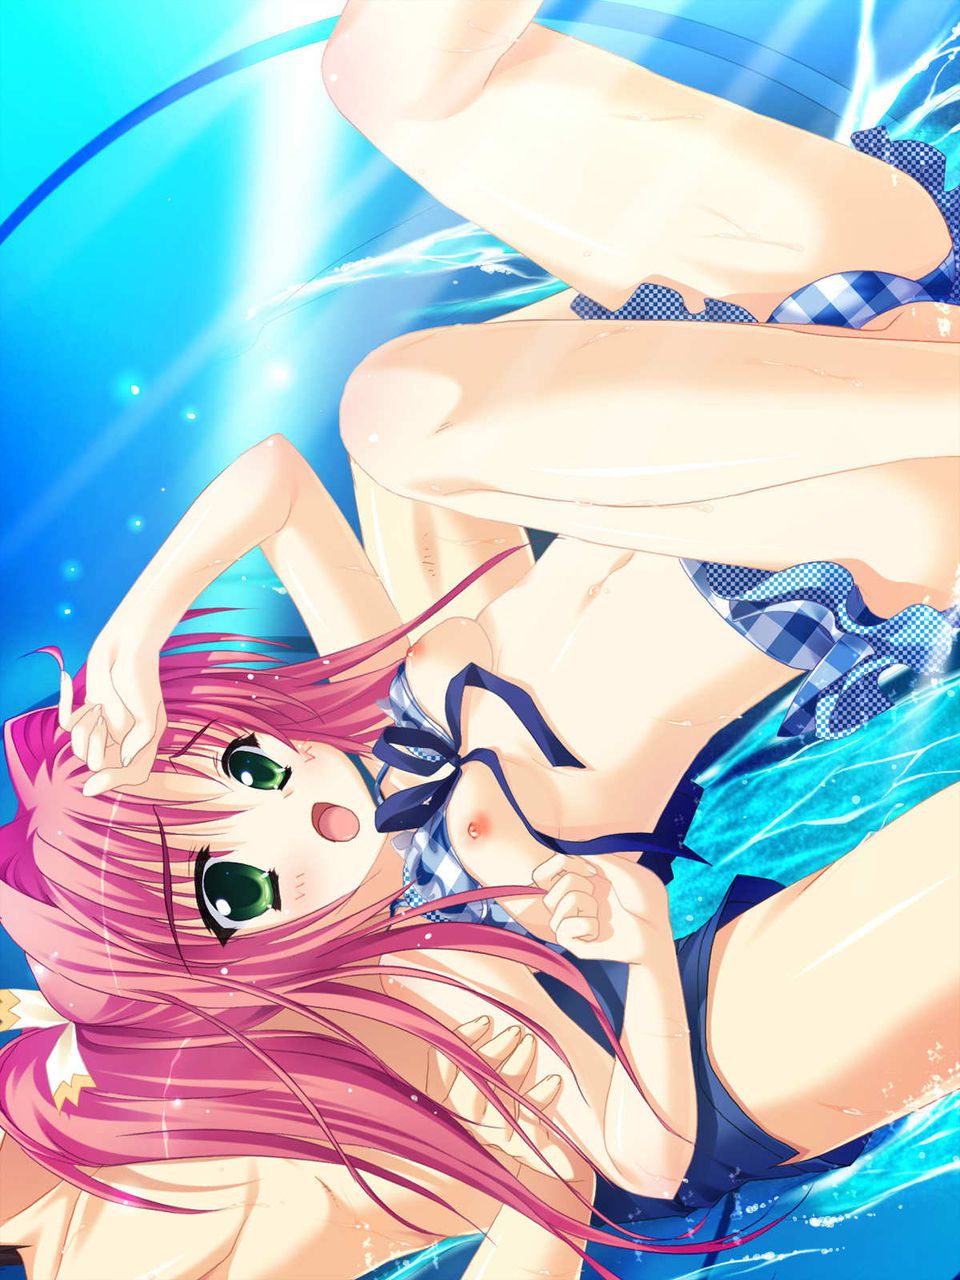 [Swimsuit] can't wait until summer vacation! I want to see a swimsuit and a bikini girl! Part 5 [2-d] 5